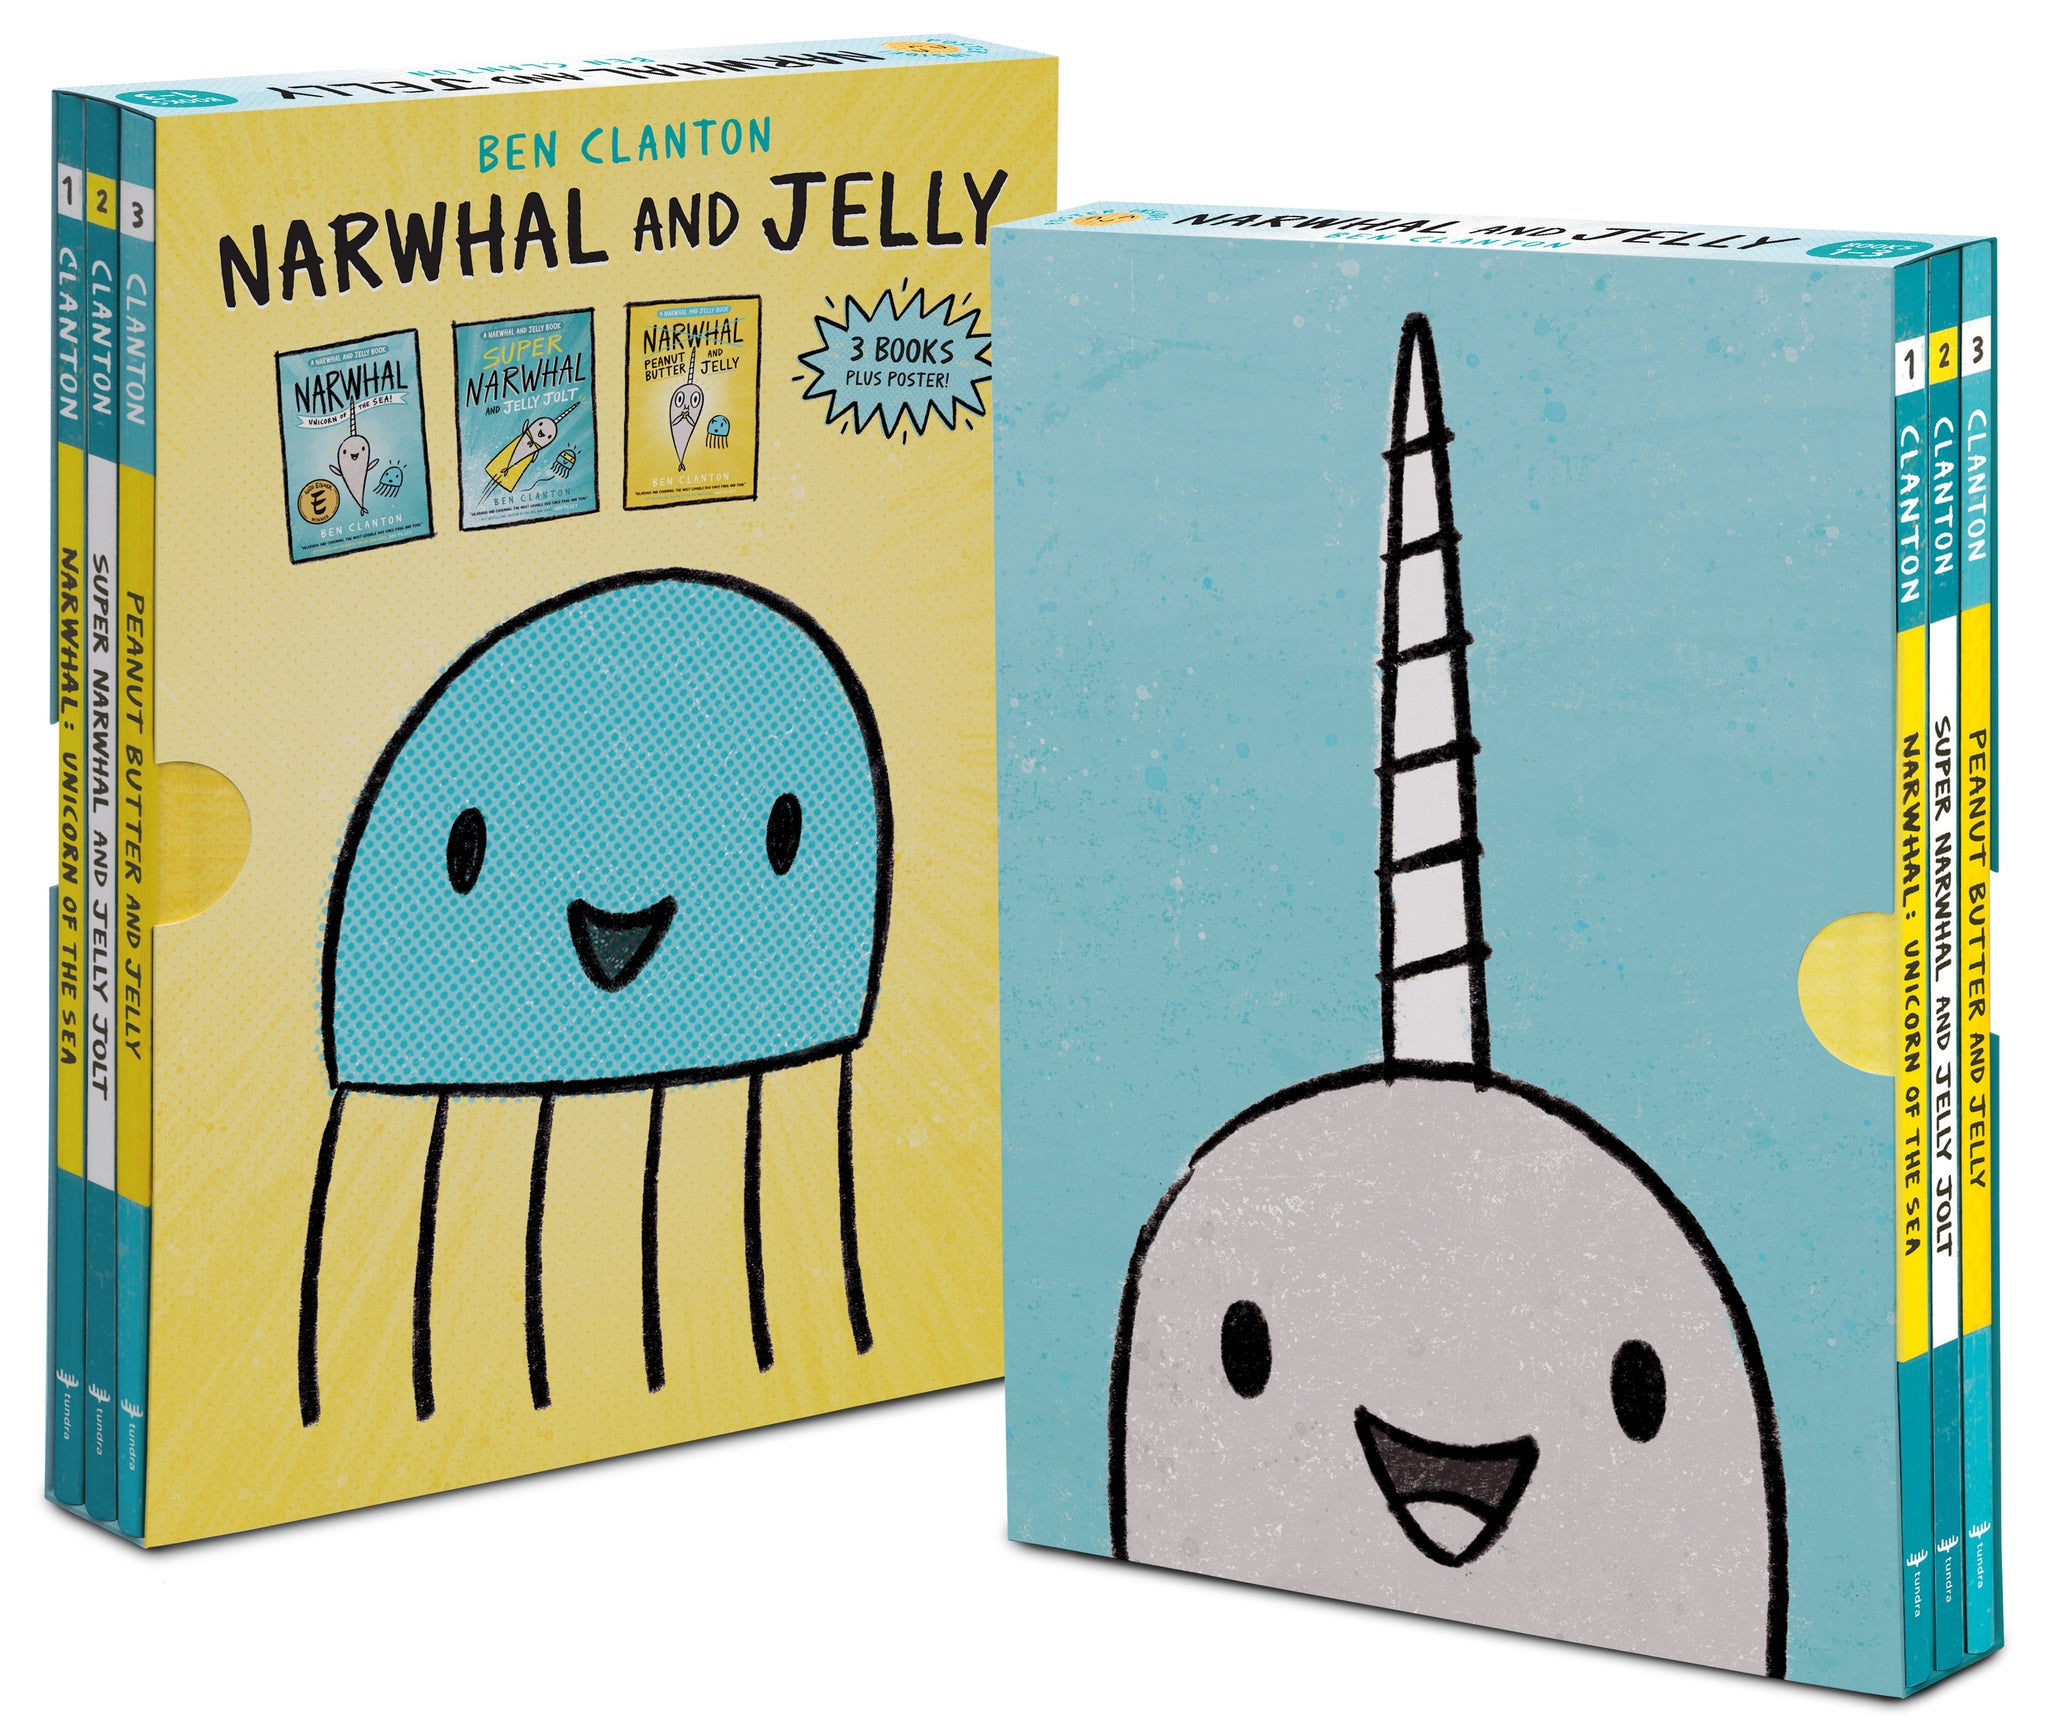 narwhal and jelly box set (books 1, 2, 3, and poster)